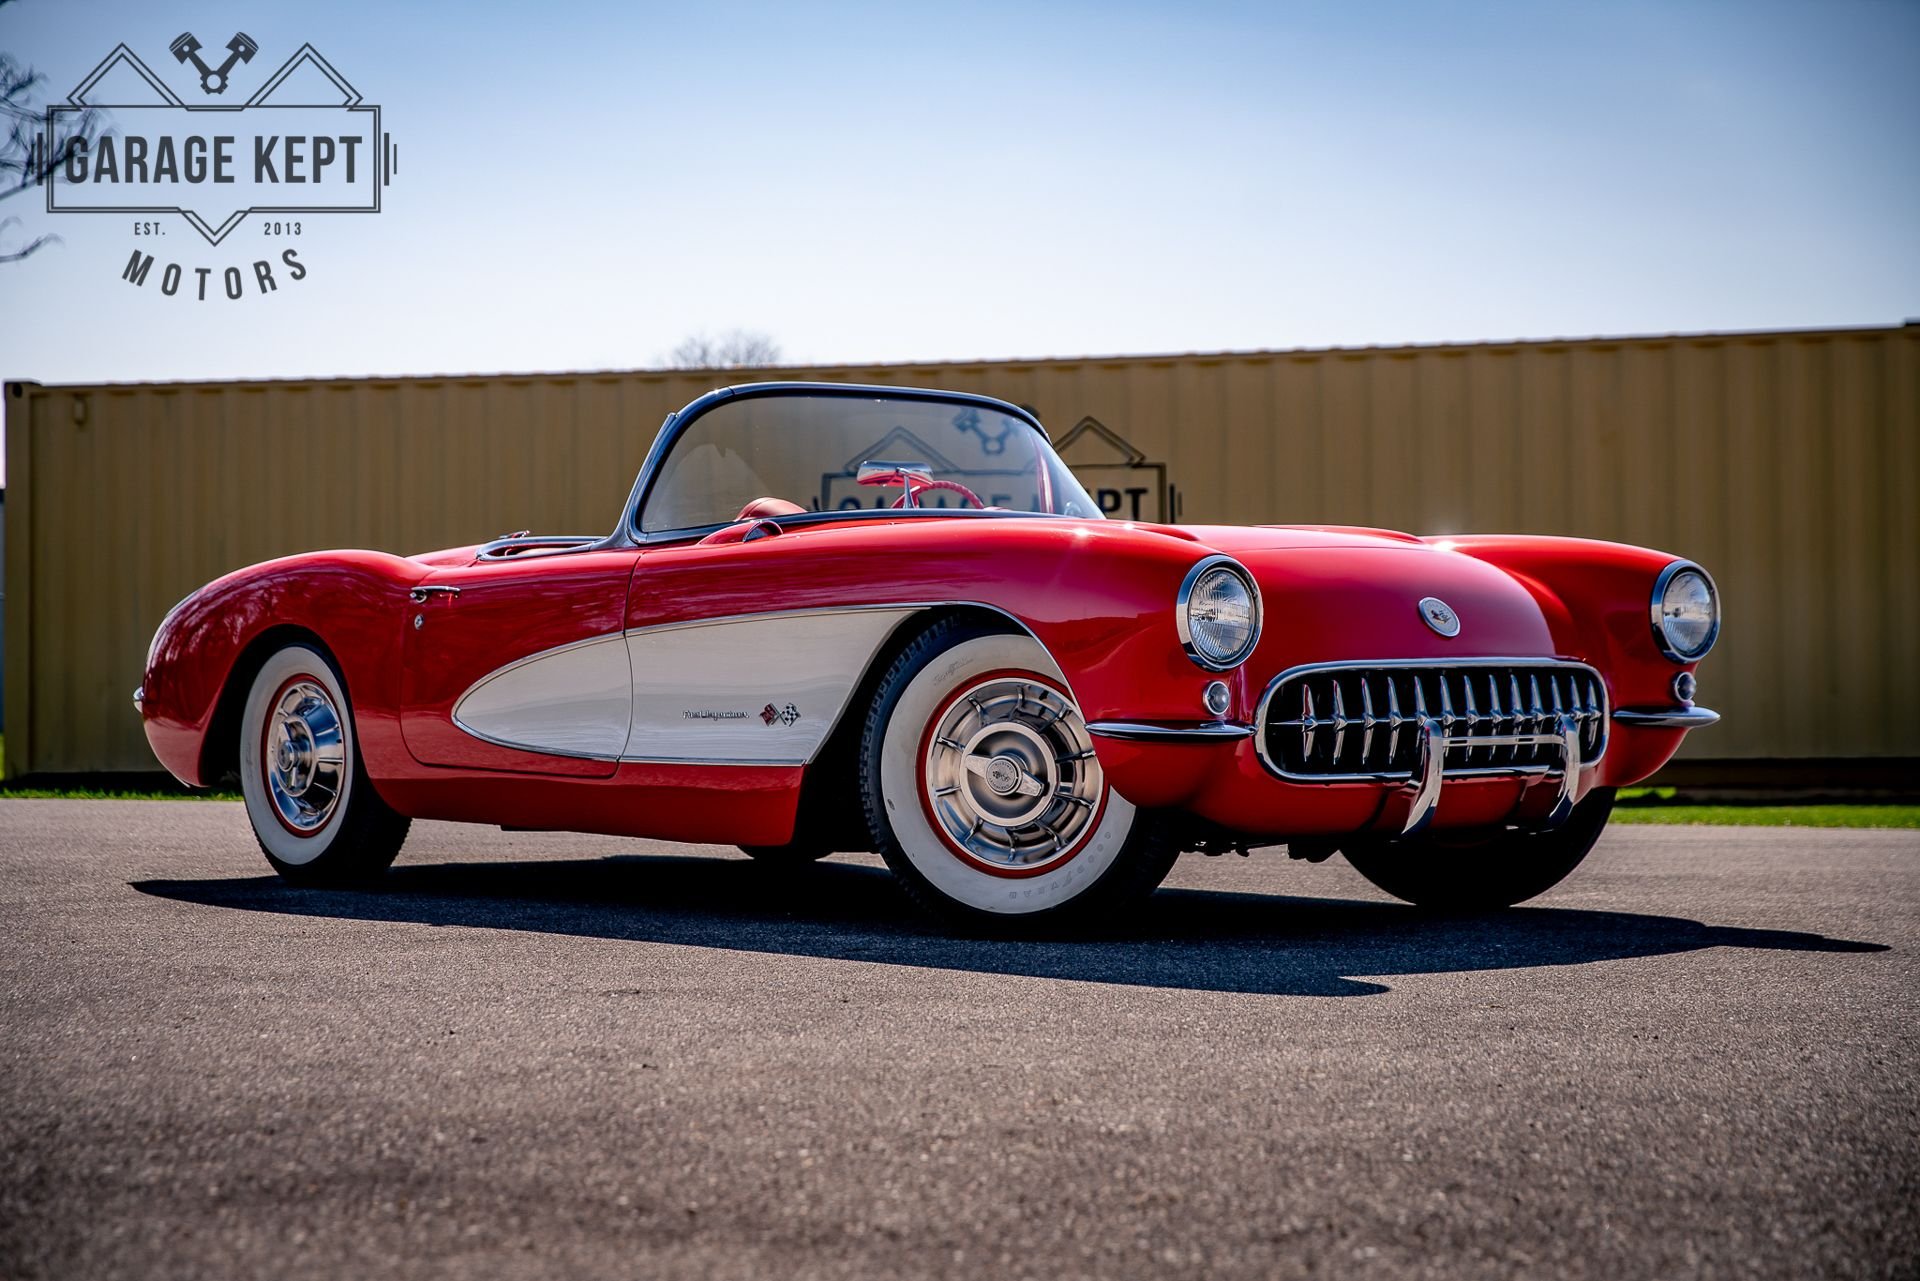 Red 1957 Chevy Corvette Fuelie Will Bring Back the Rock Age This 